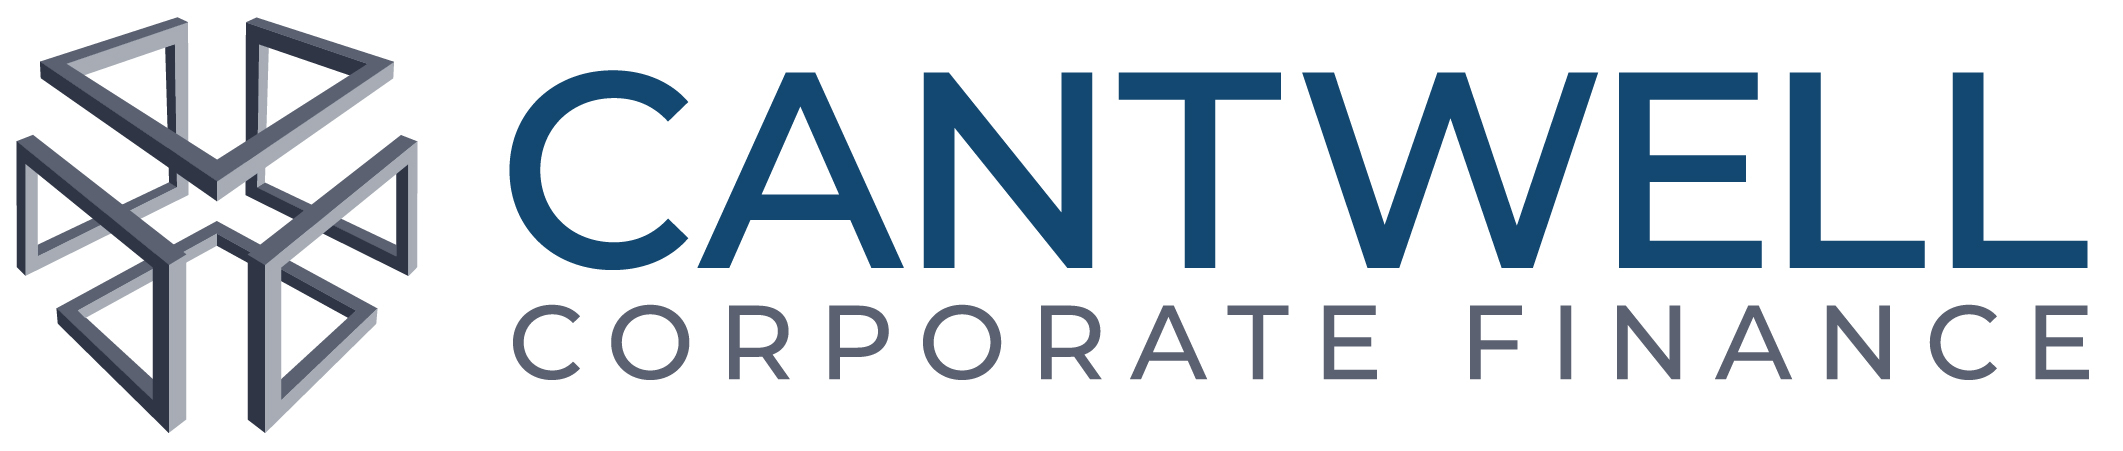 Cantwell Corporate Finance